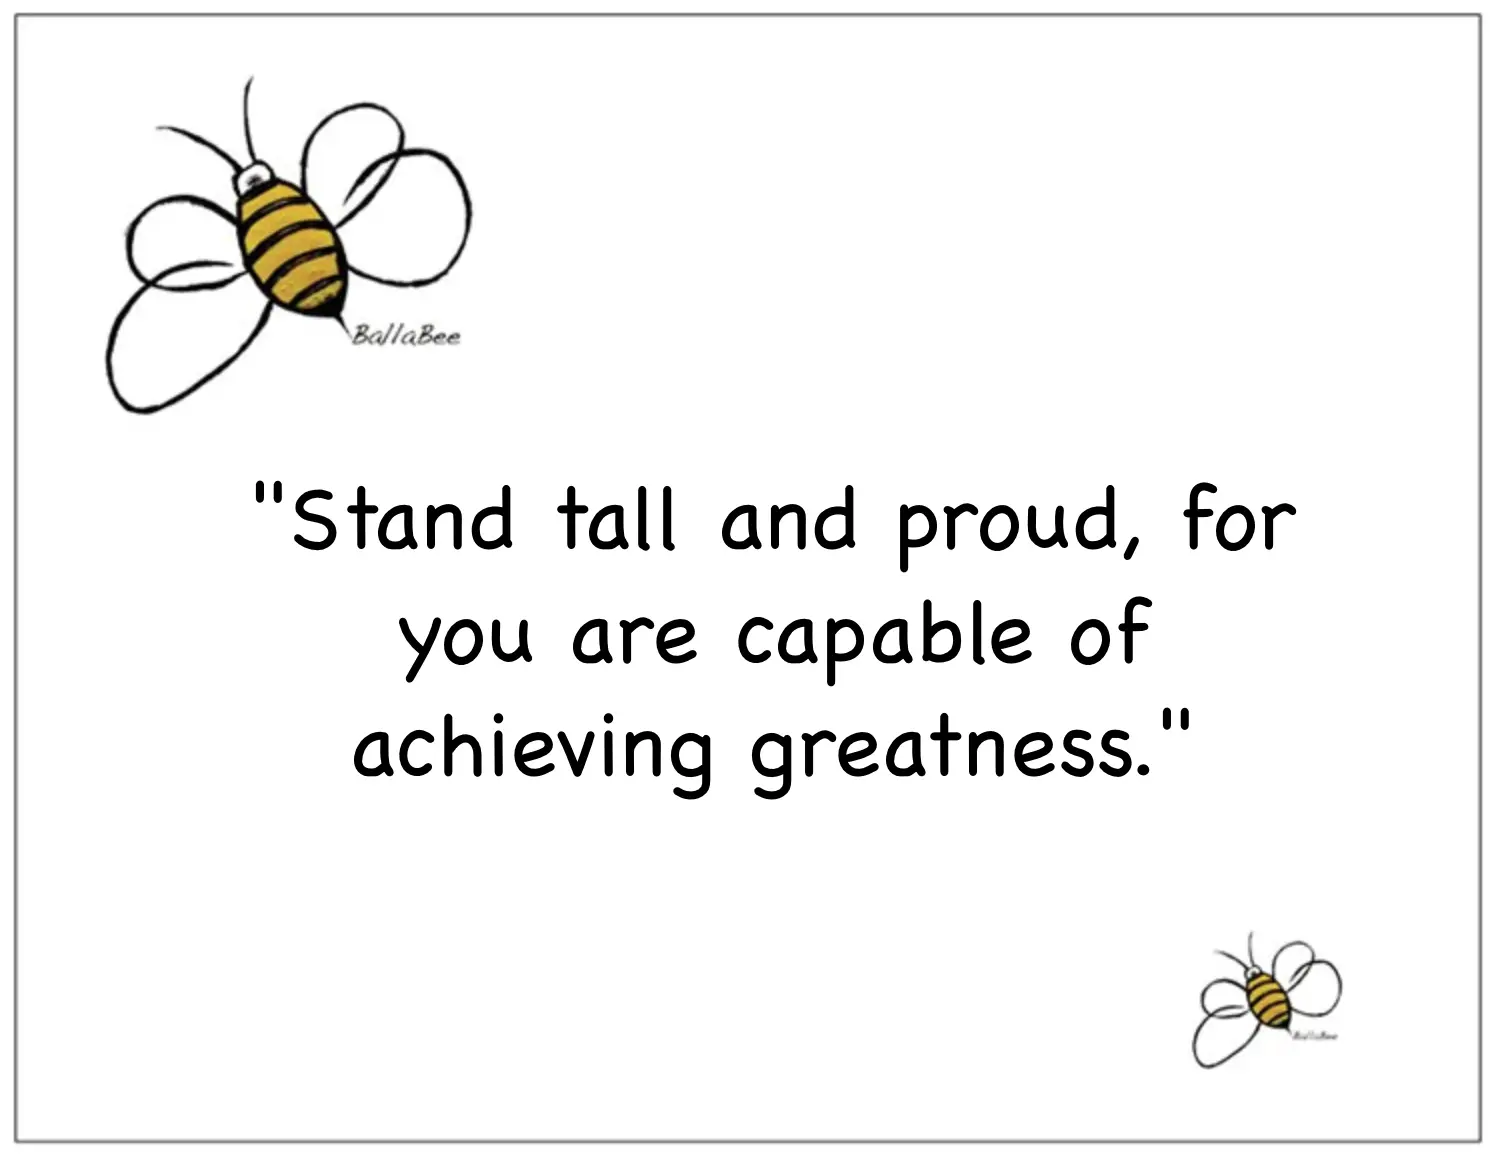 Stand tall and proud, for you are capable of achieving greatness